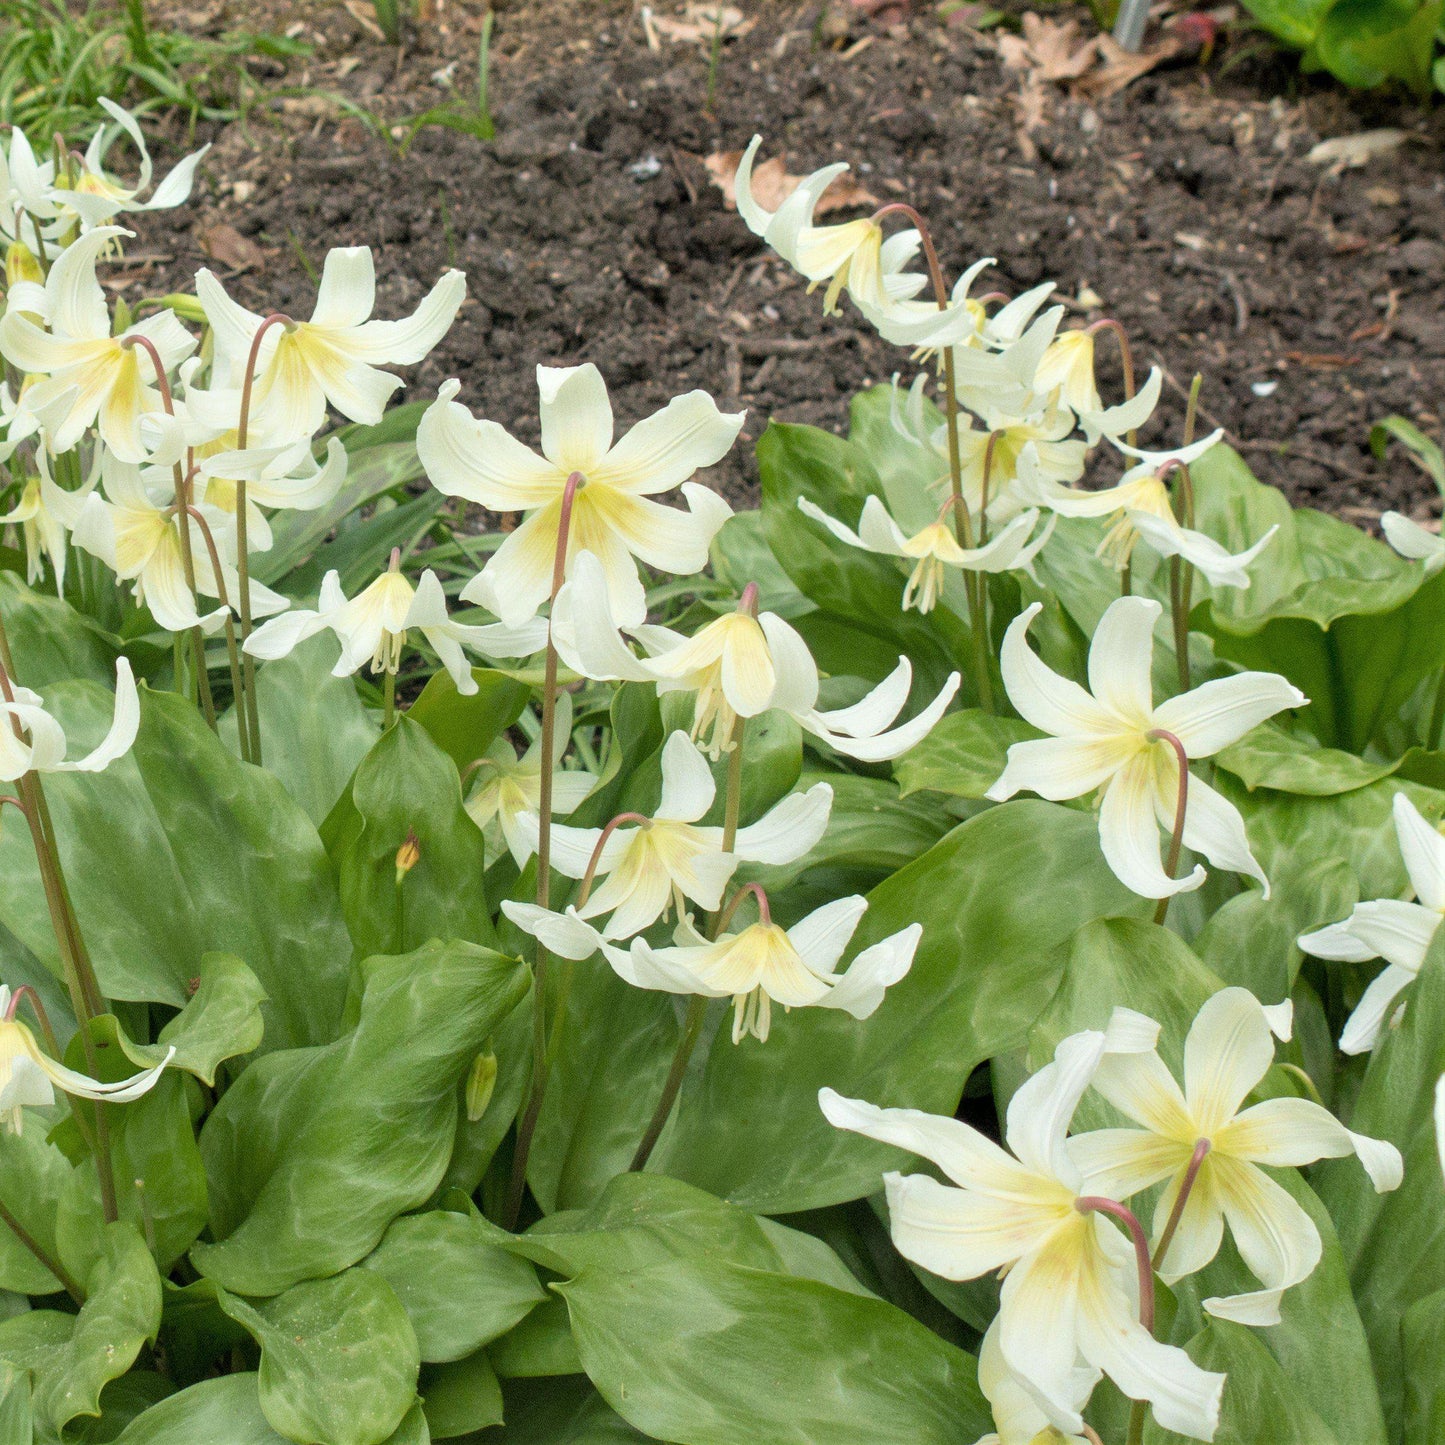 A Patch of "White Beauty" Erythronium Flowers